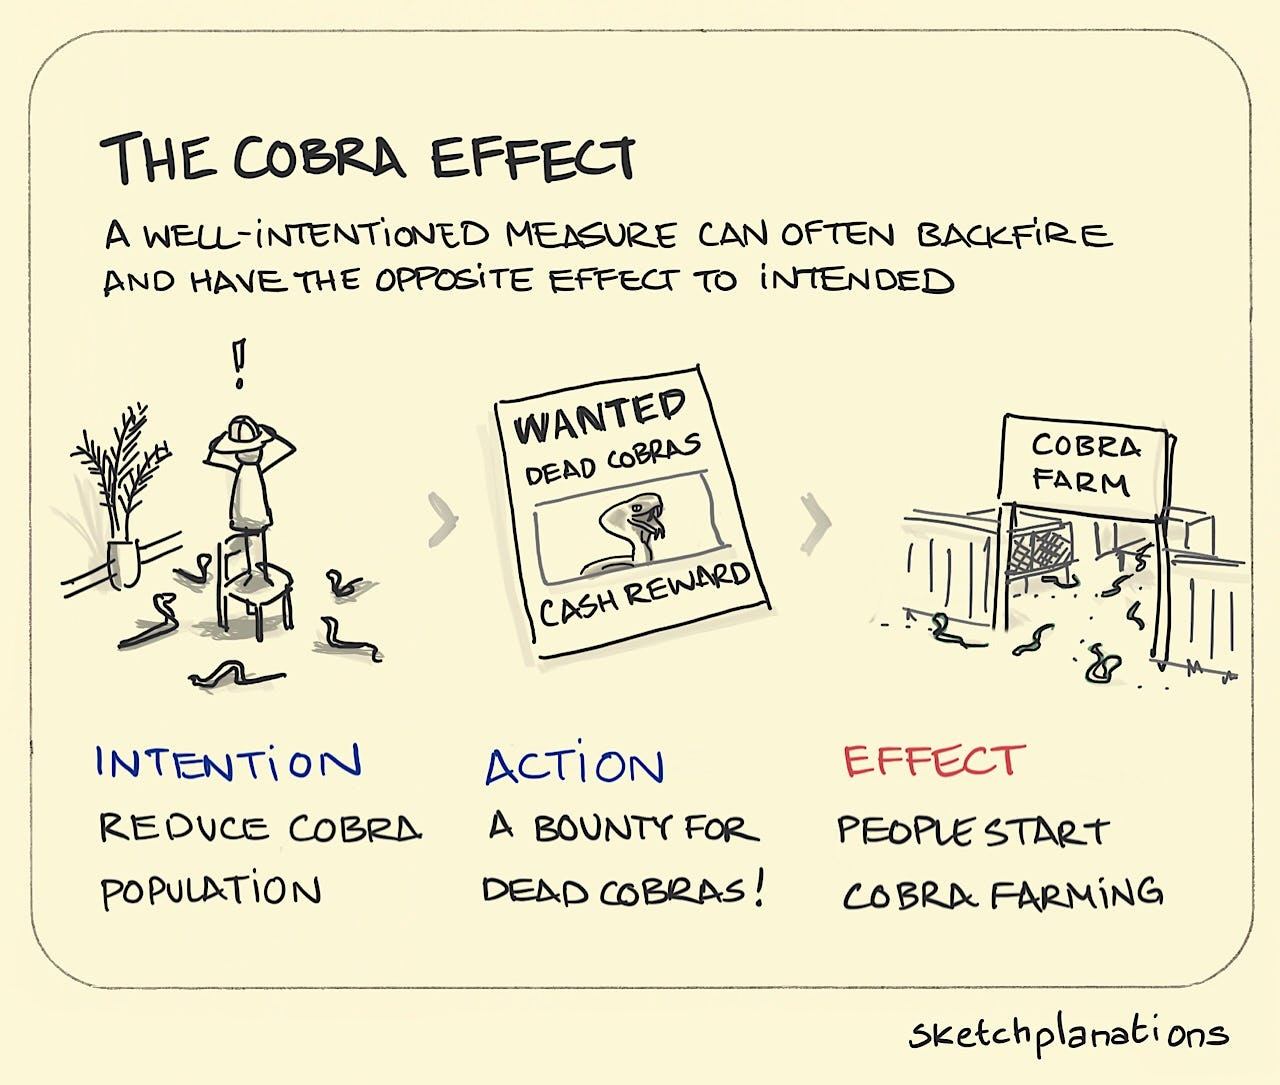 The cobra effect illustrated with the intention to reduce the cobra population and a bounty for dead cobras leading to cobra farming and cobras escaping. A nice example of unintended consequences.